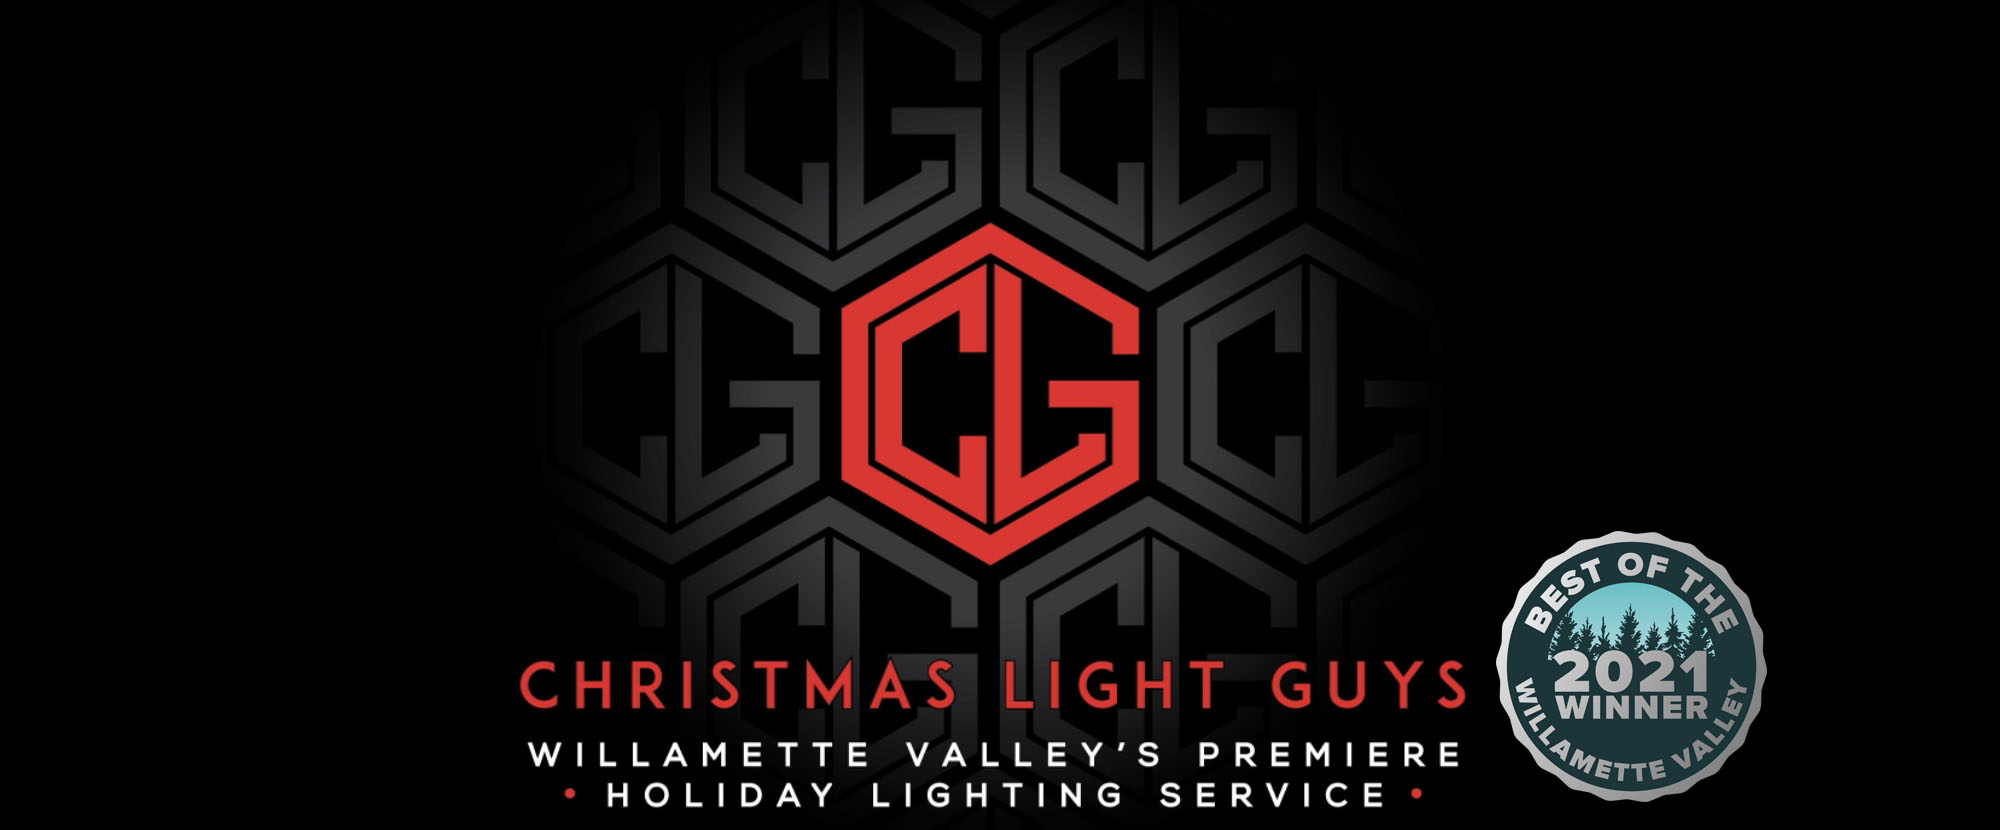 The Christmas Light Guys - Commercial and Estate Properties Holiday Lighting